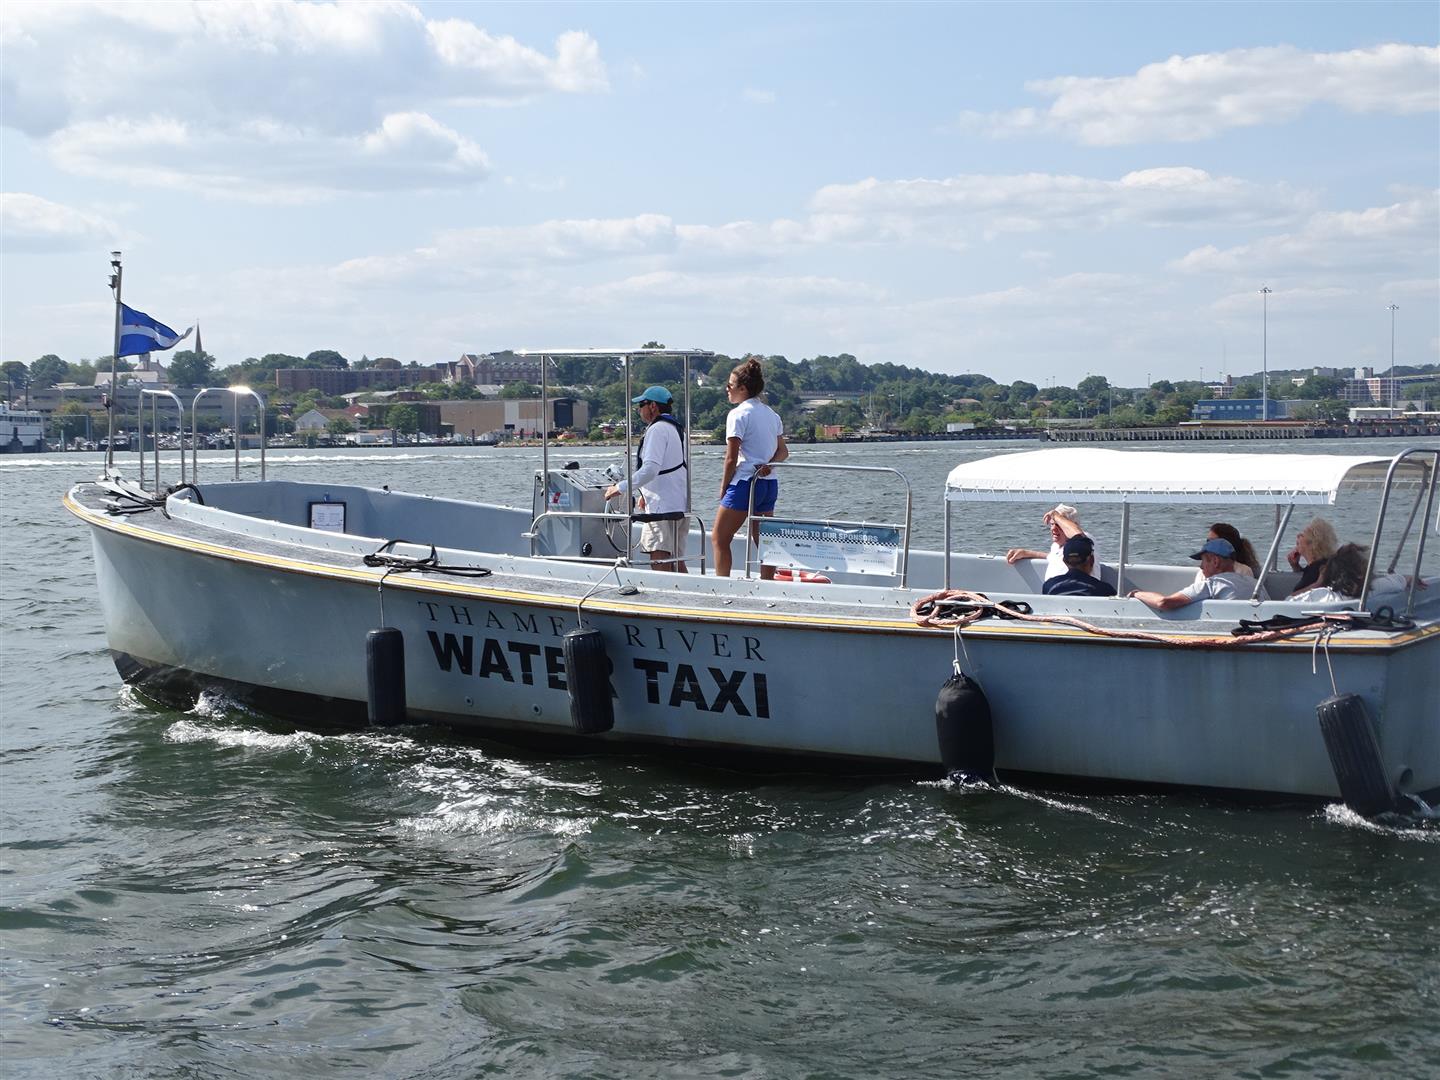 Water taxi season starts Saturday in New London and Groton Photo